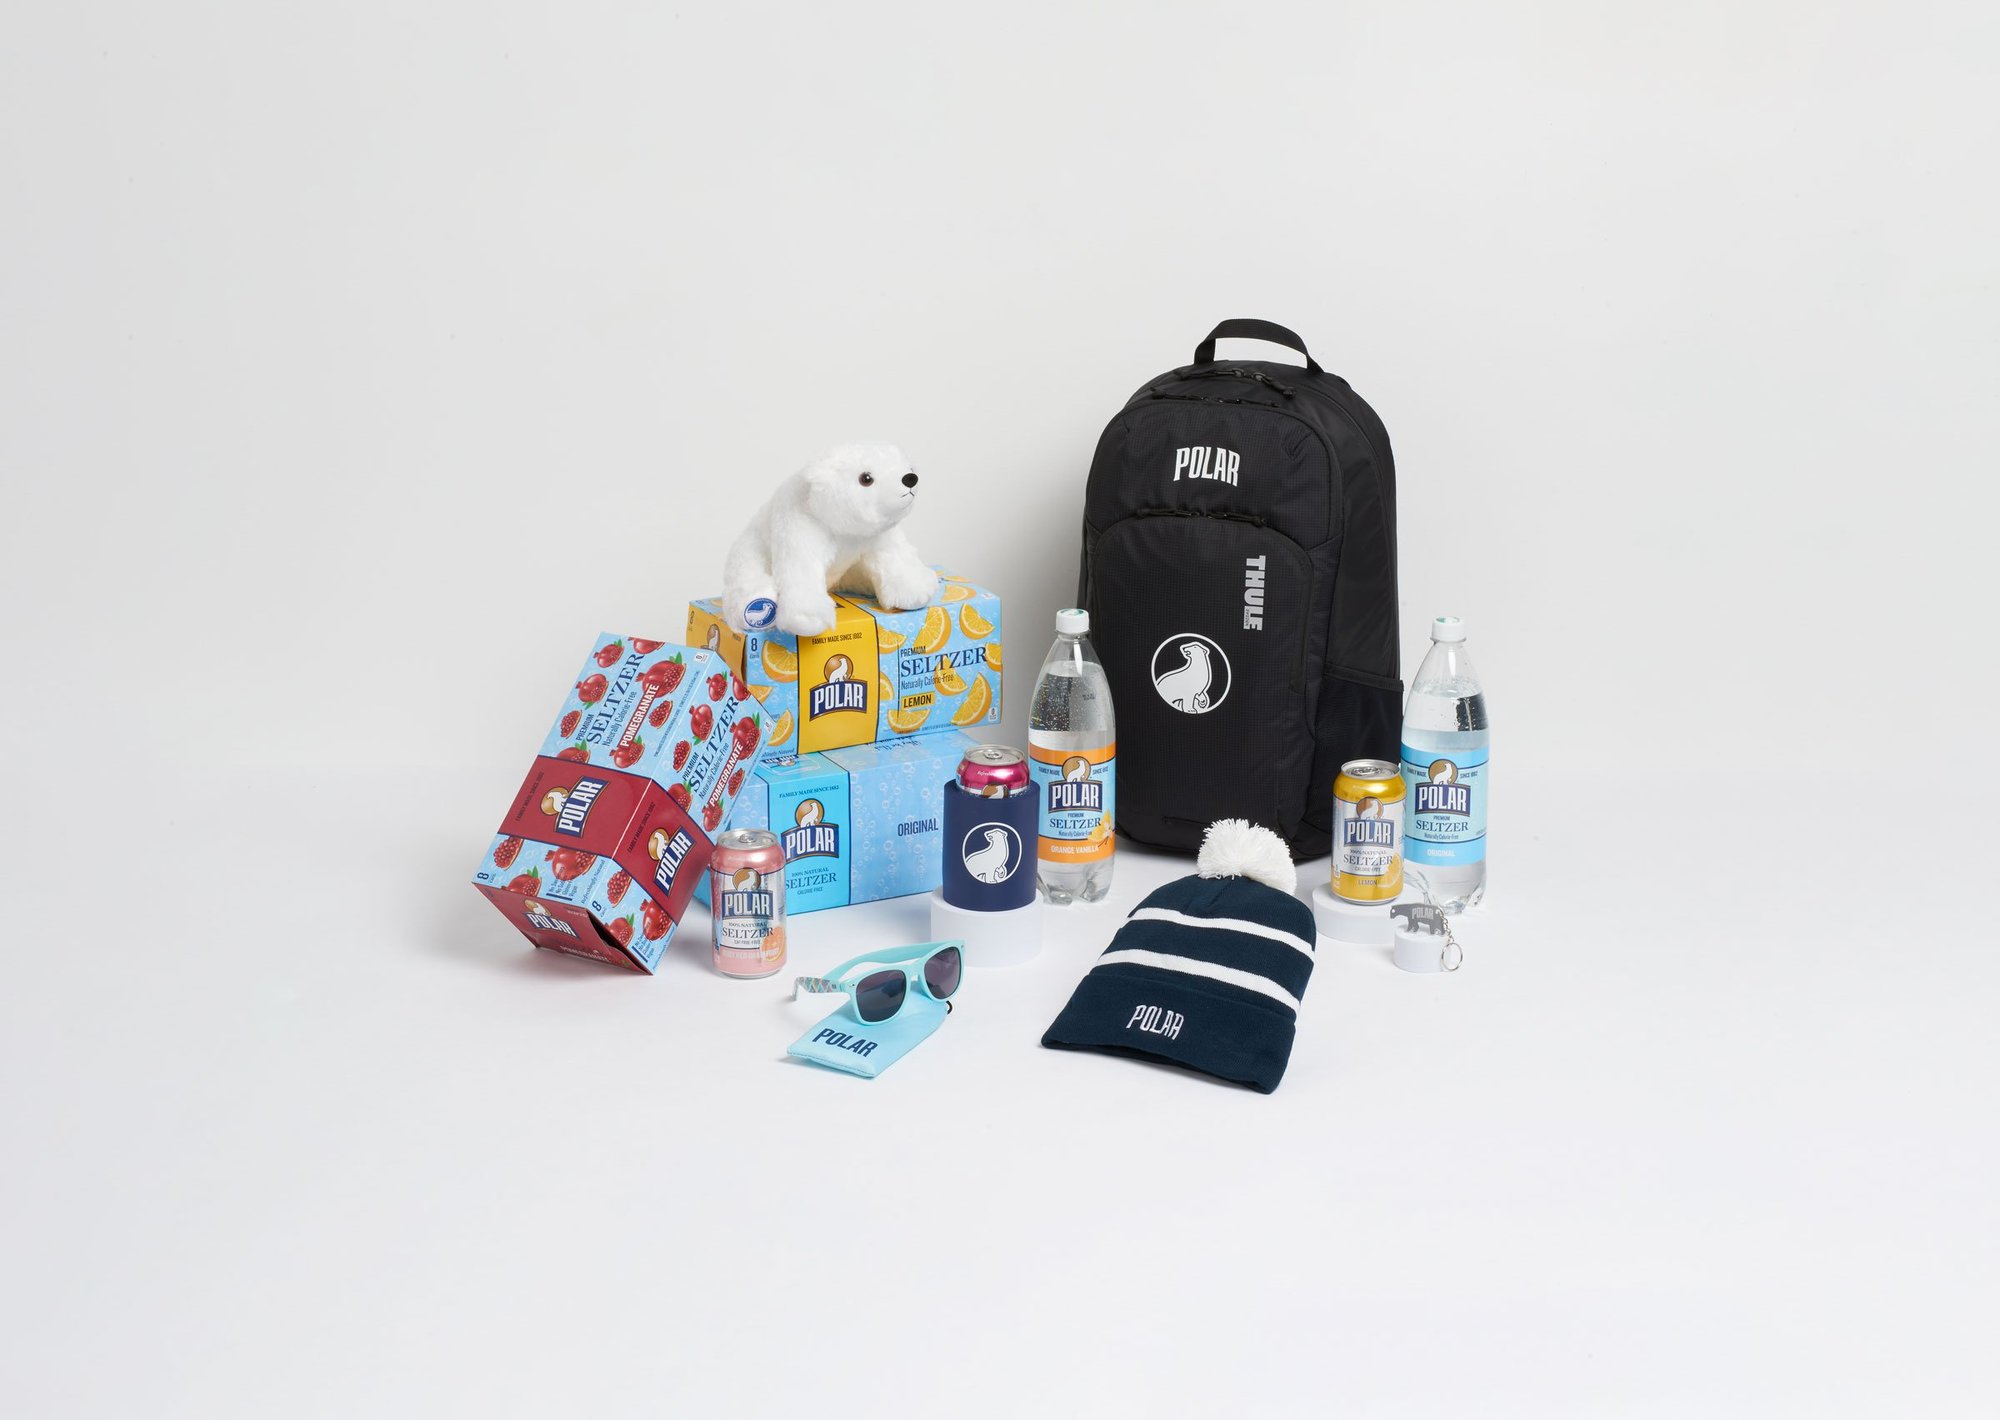 Polar branded back pack, beanie hat, sunglasses and other merch.